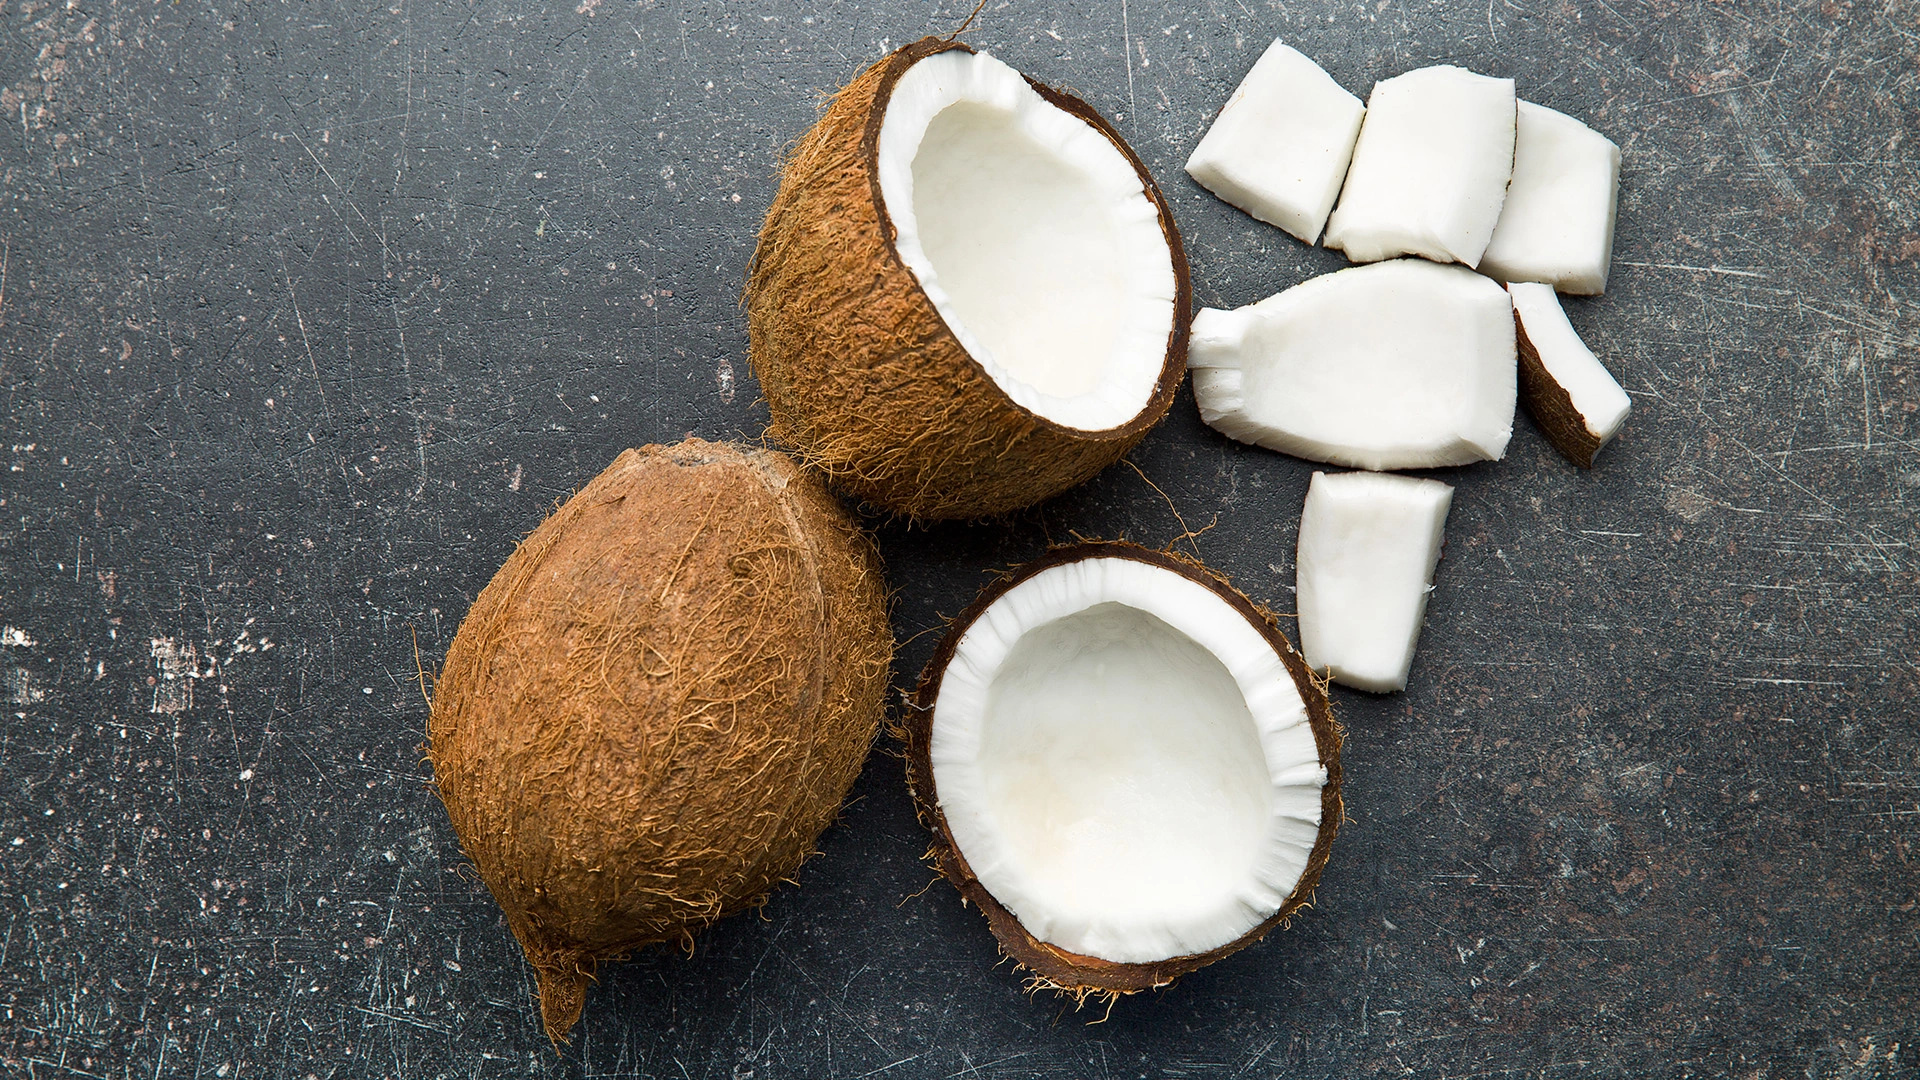 Coconut: Low in carbs, The best substitute for carb-rich snacks. 1920x1080 Full HD Background.